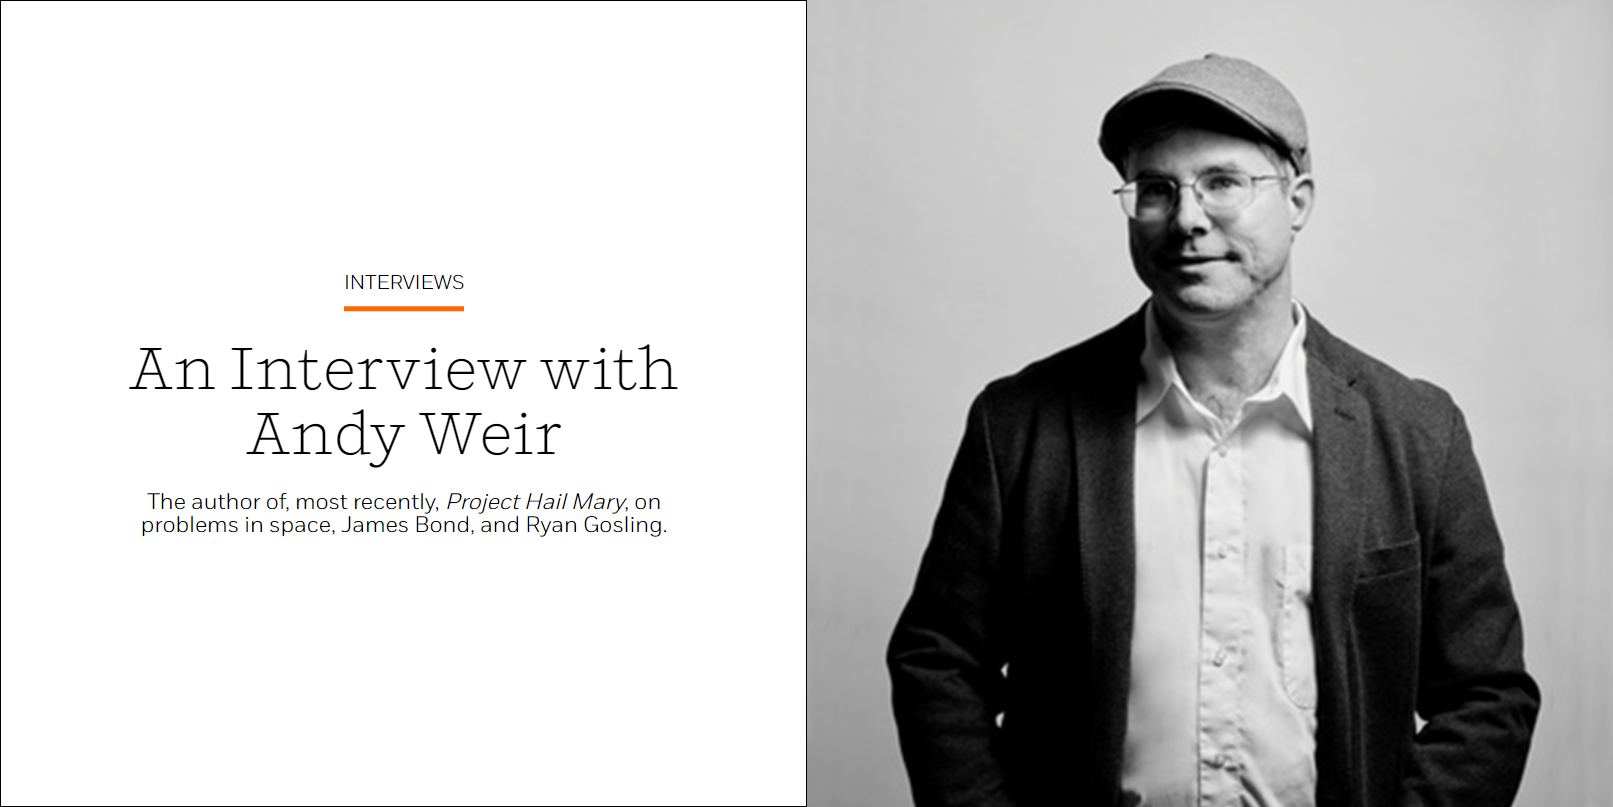 An Interview with Andy Weir